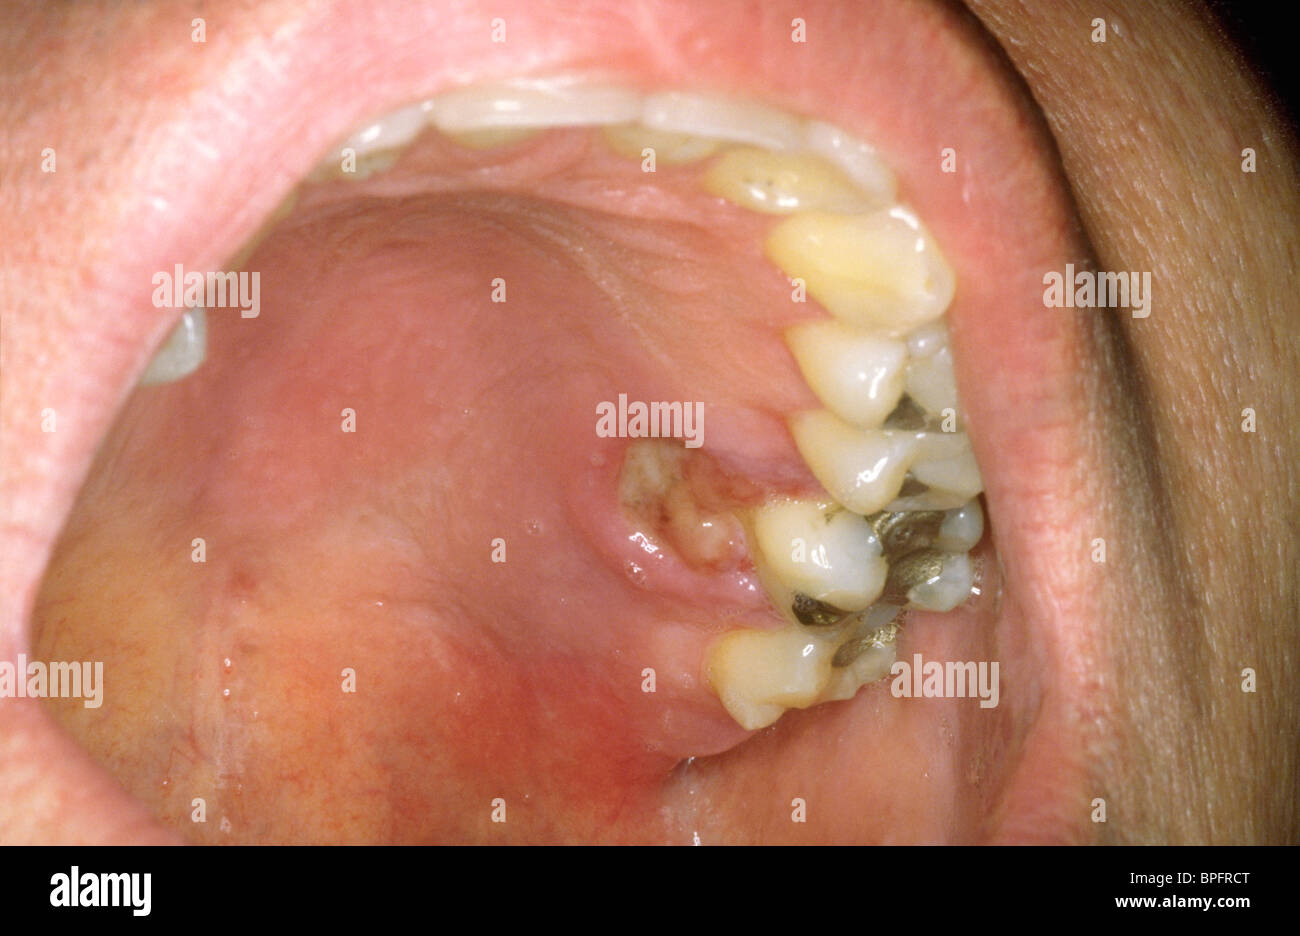 Mouth ulcer Stock Photo